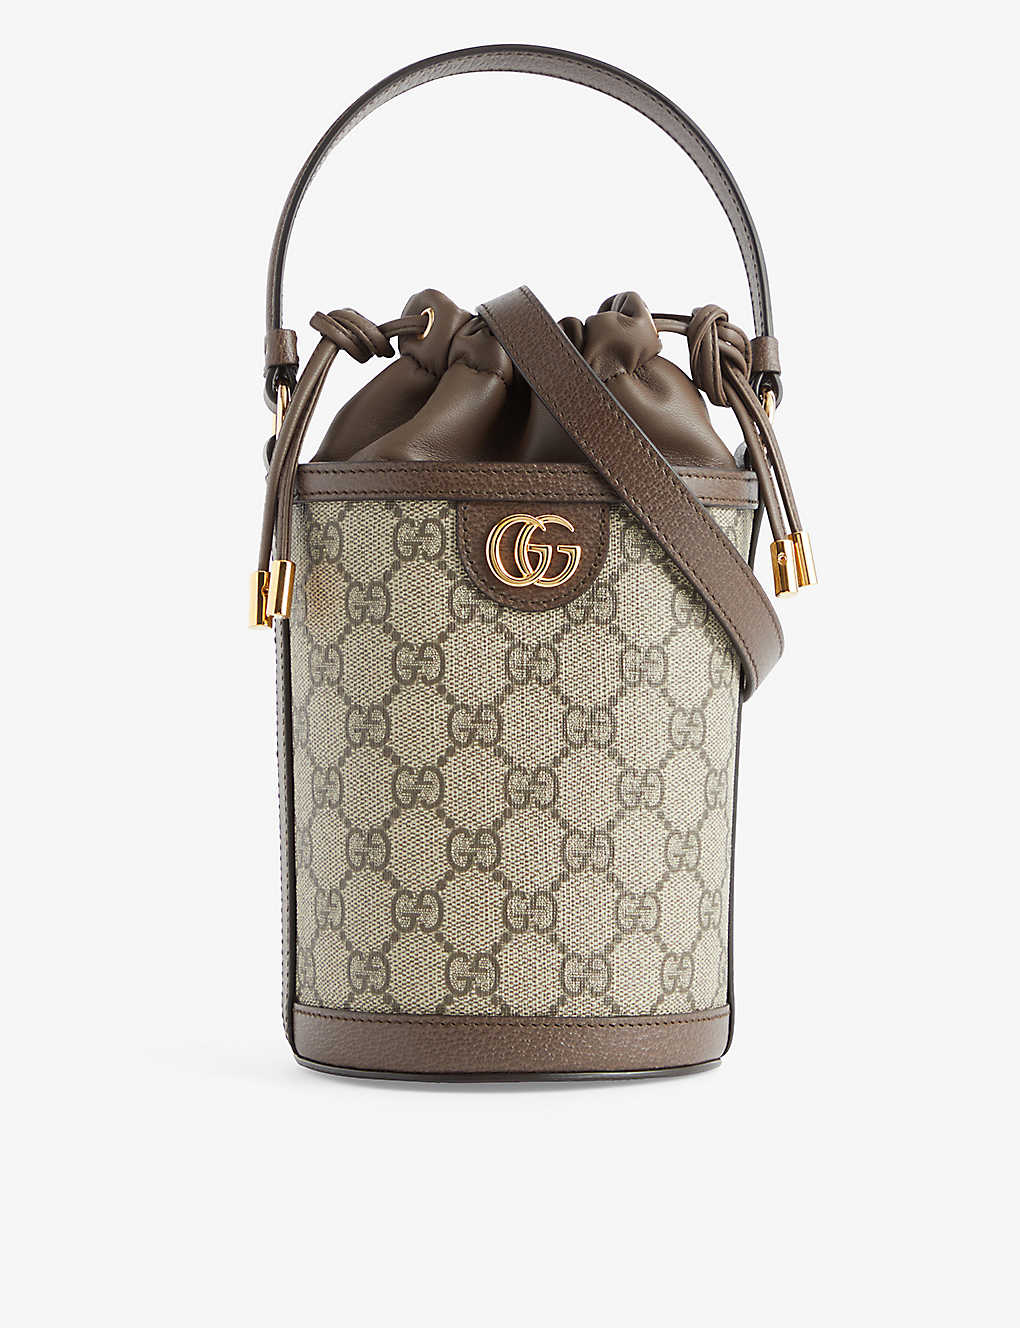 Gucci Ophidia Gg Supreme Canvas Bucket Bag In Be.eb/n.acero/n.acer